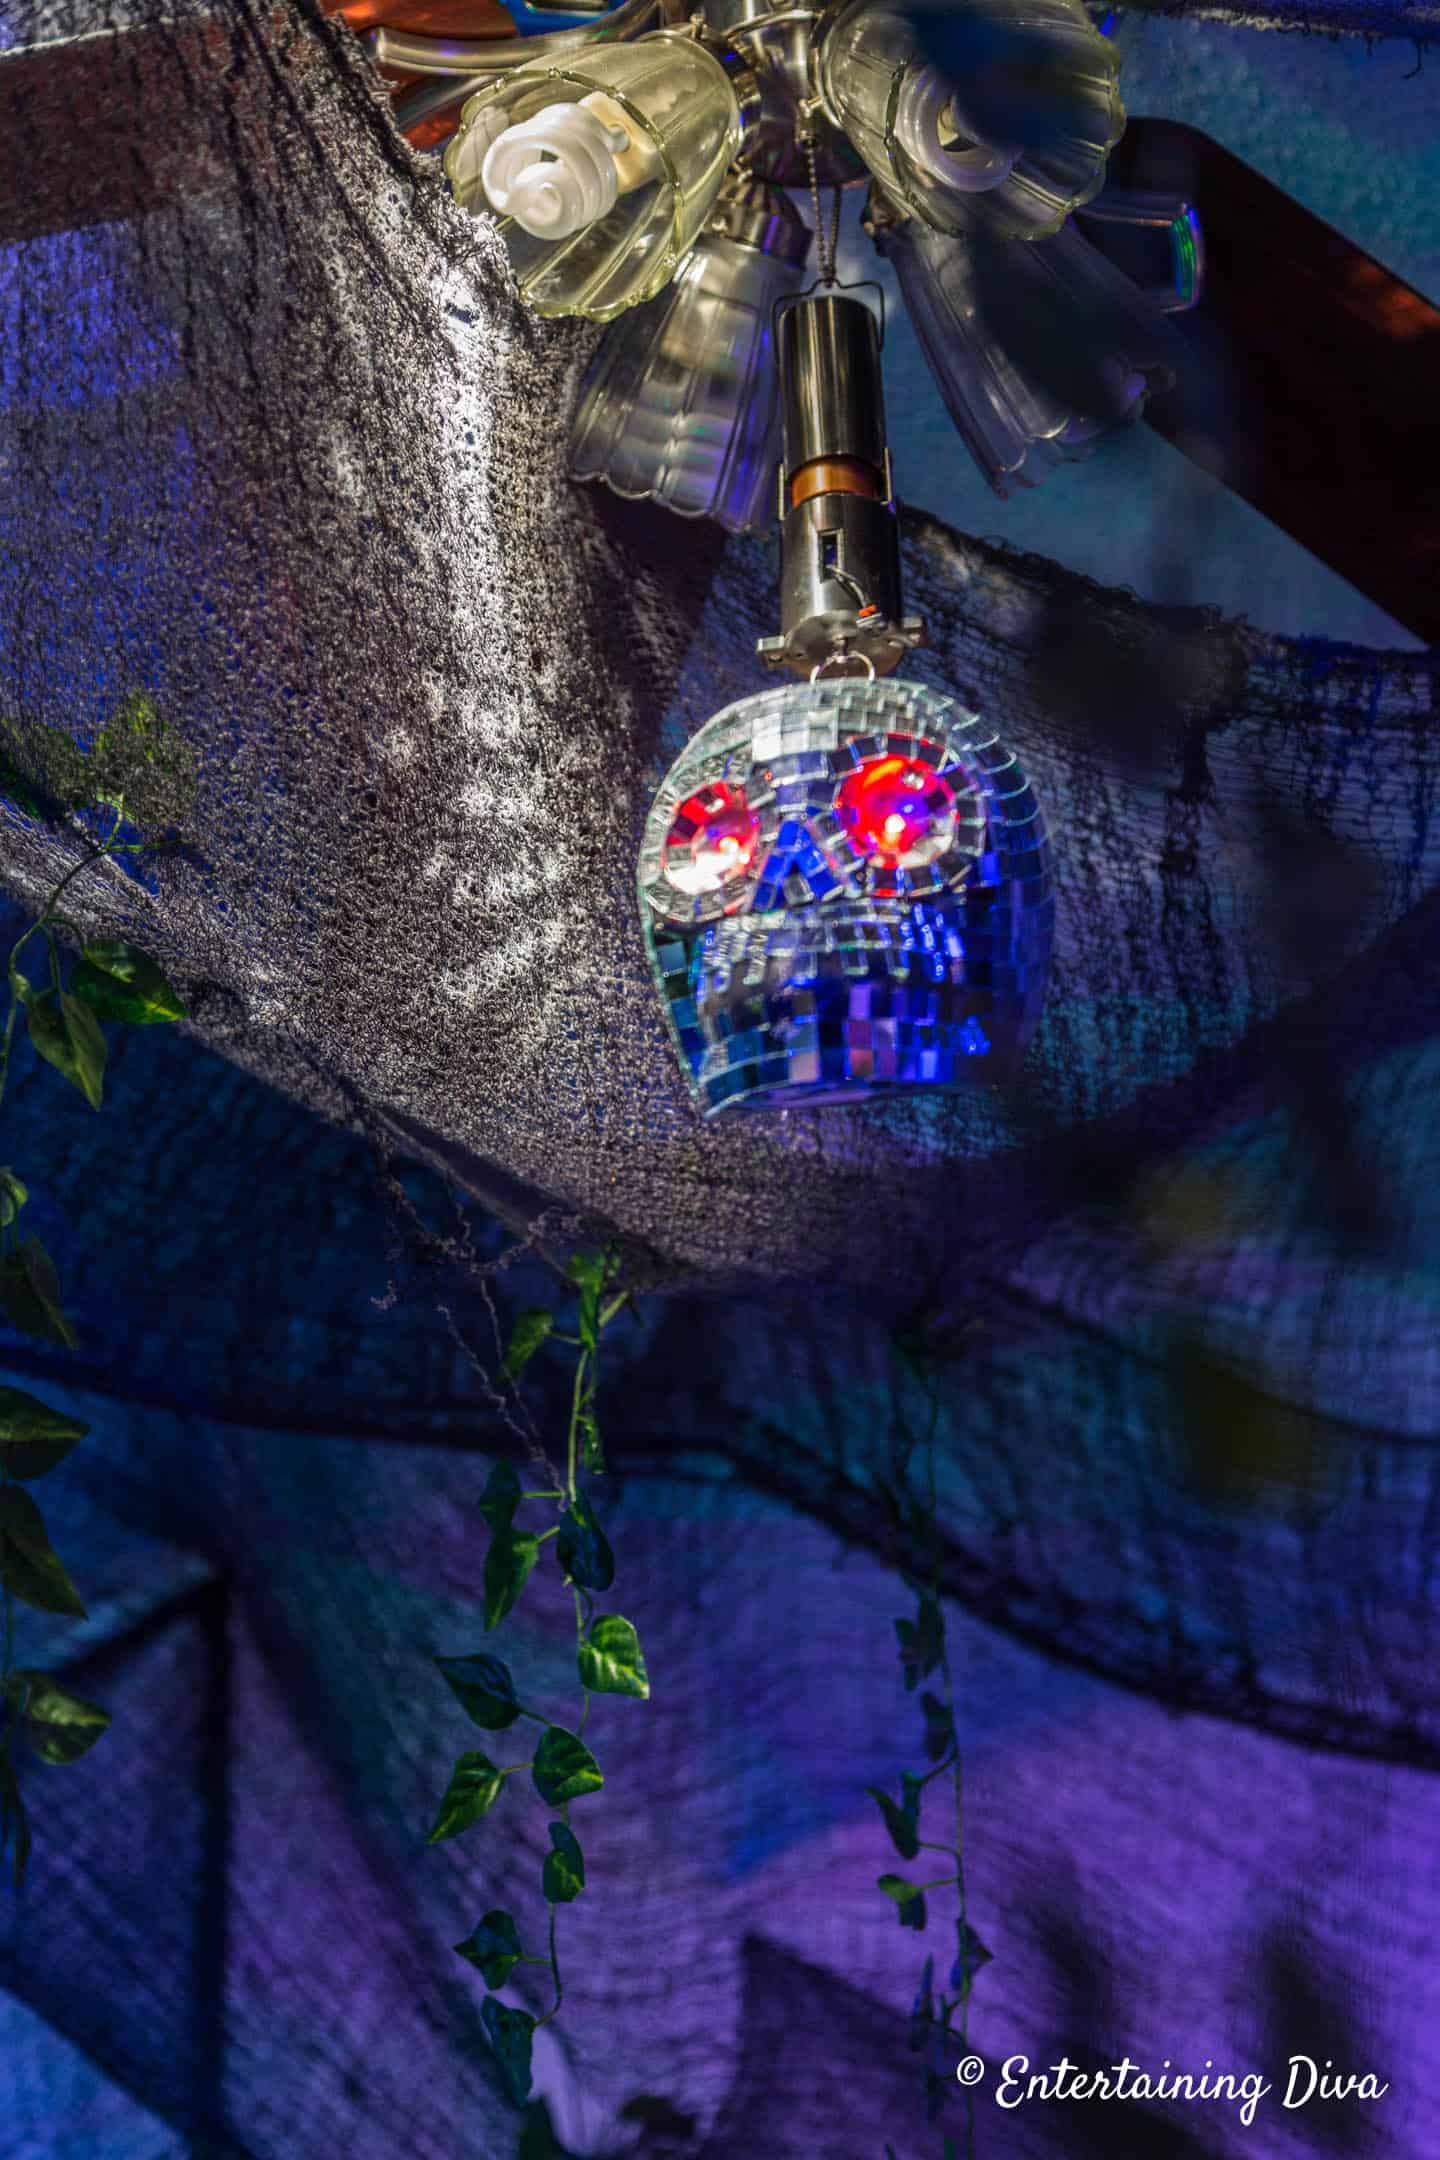 Skull disco ball hung from the ceiling